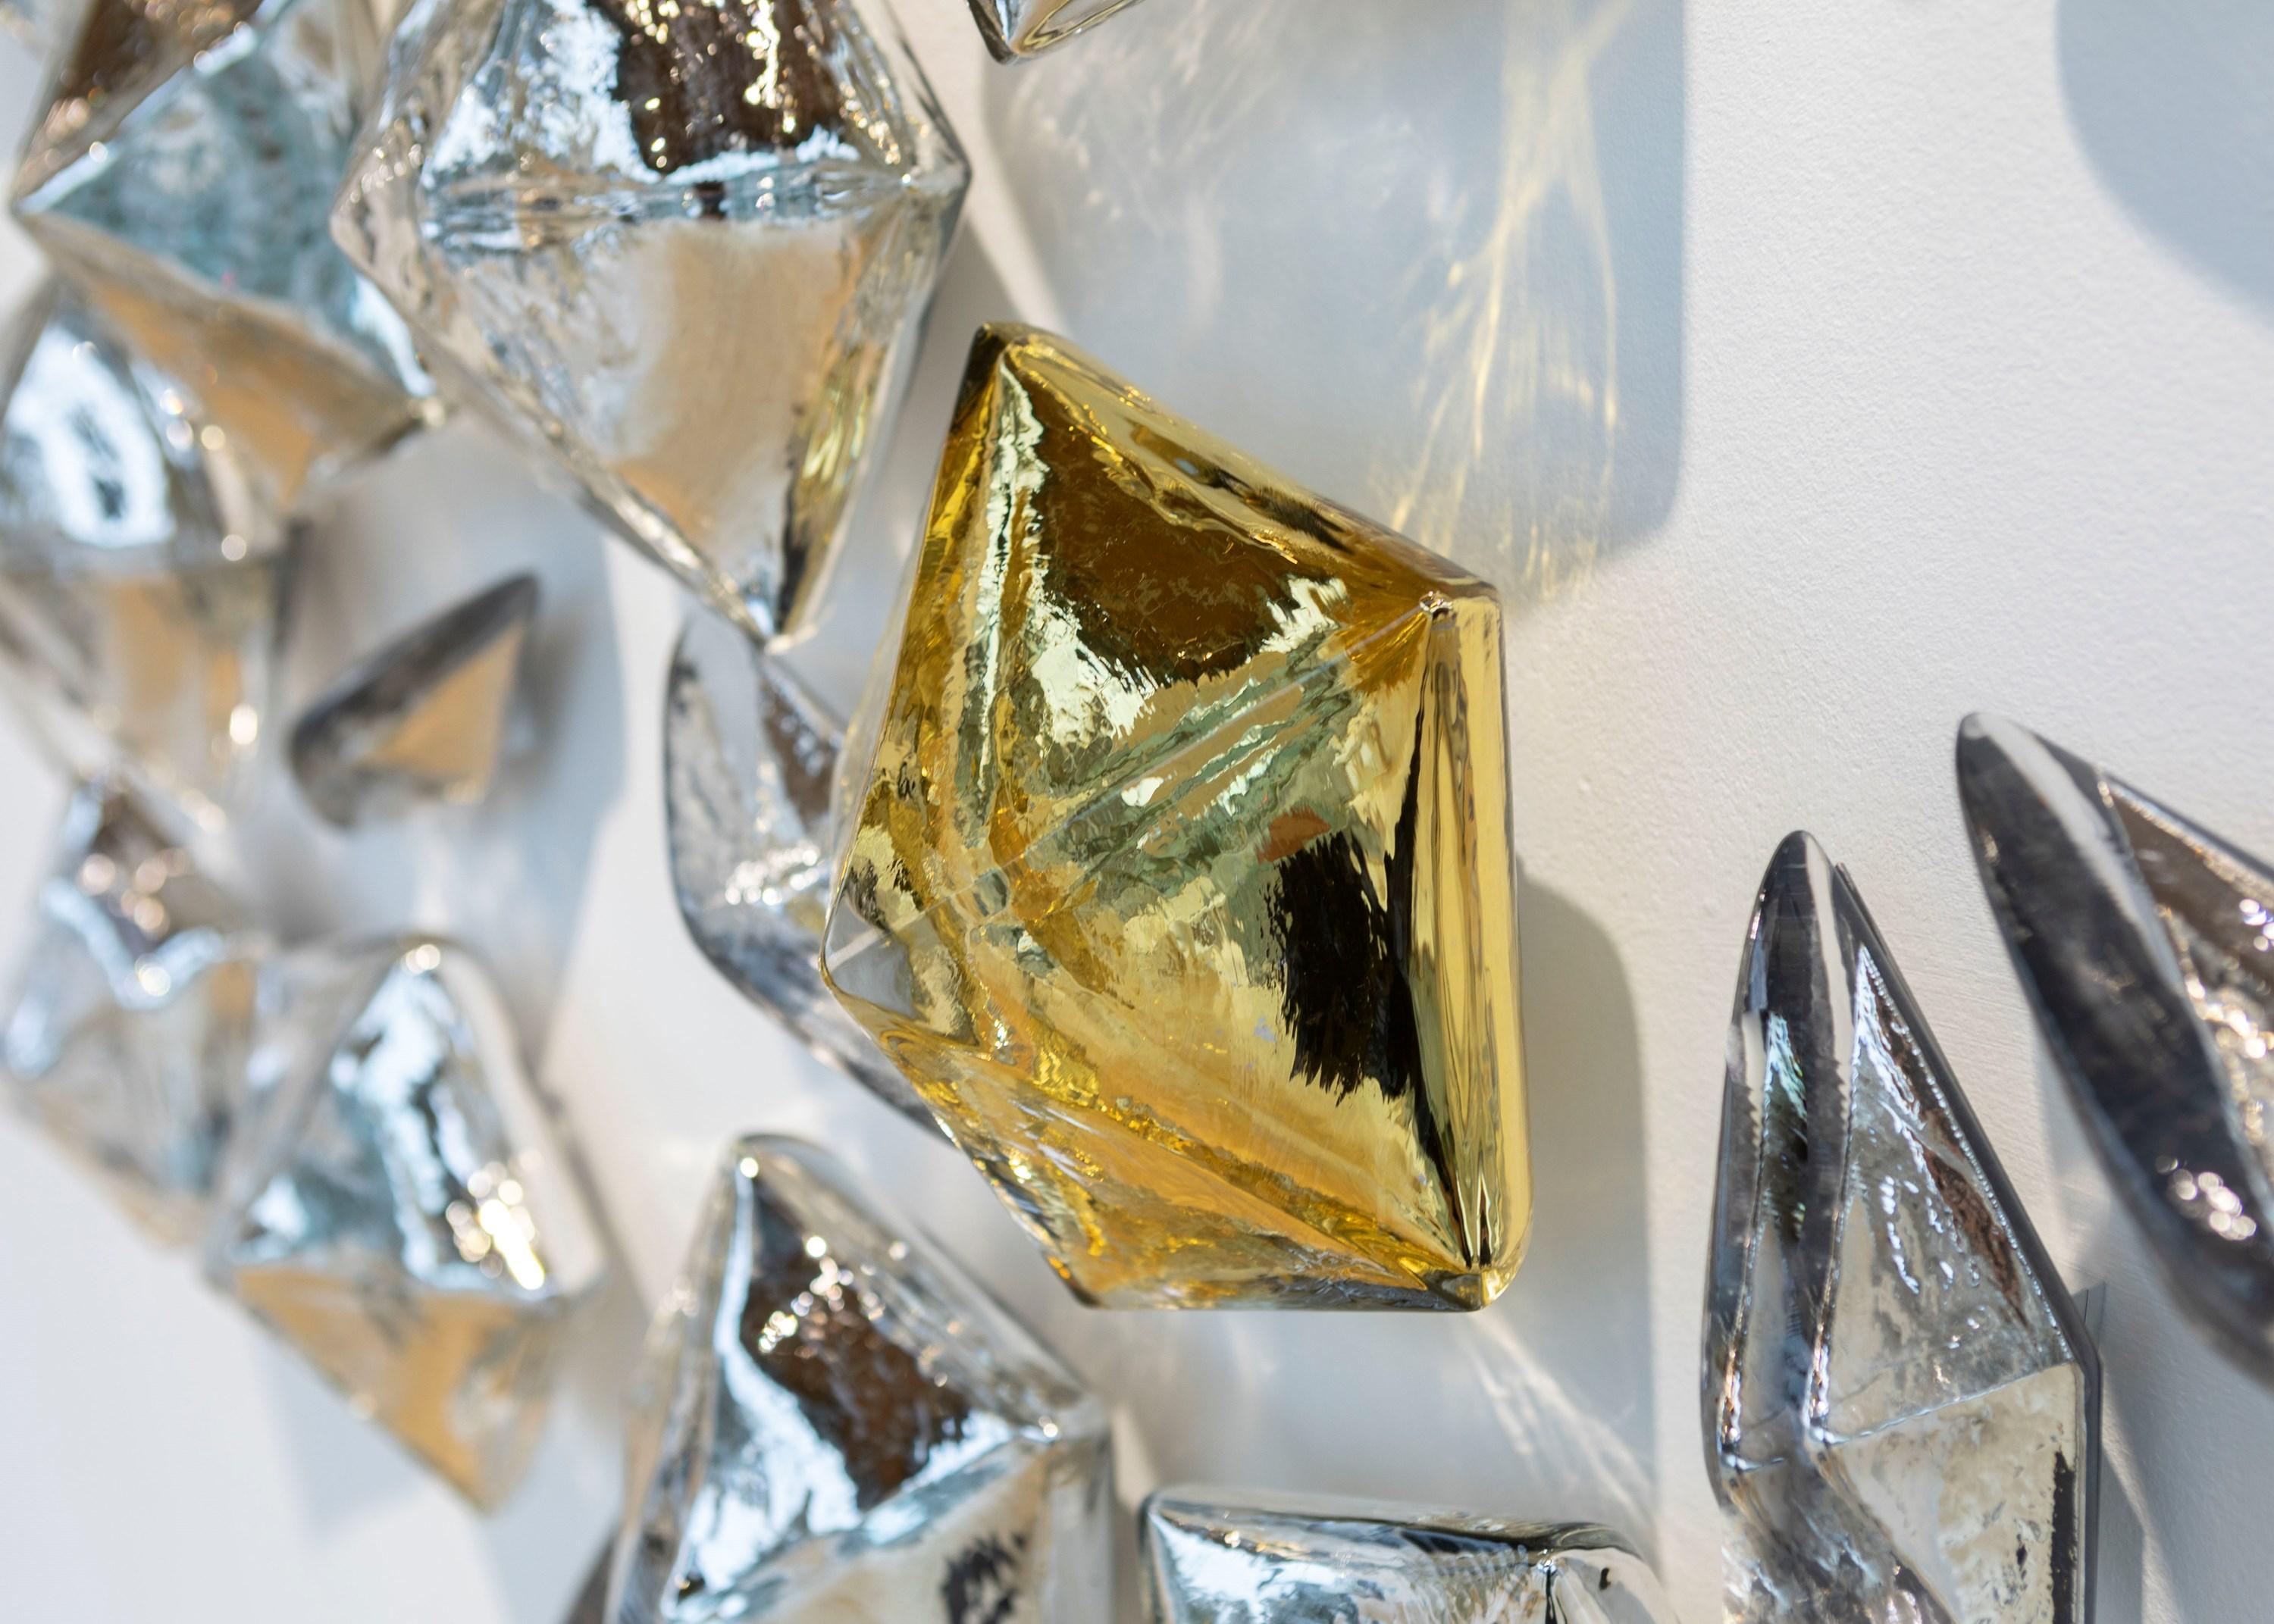 Hand-Crafted Aurum, a Wall Mounted Mirrored Glass Sculptural Artwork by Manberg Projects